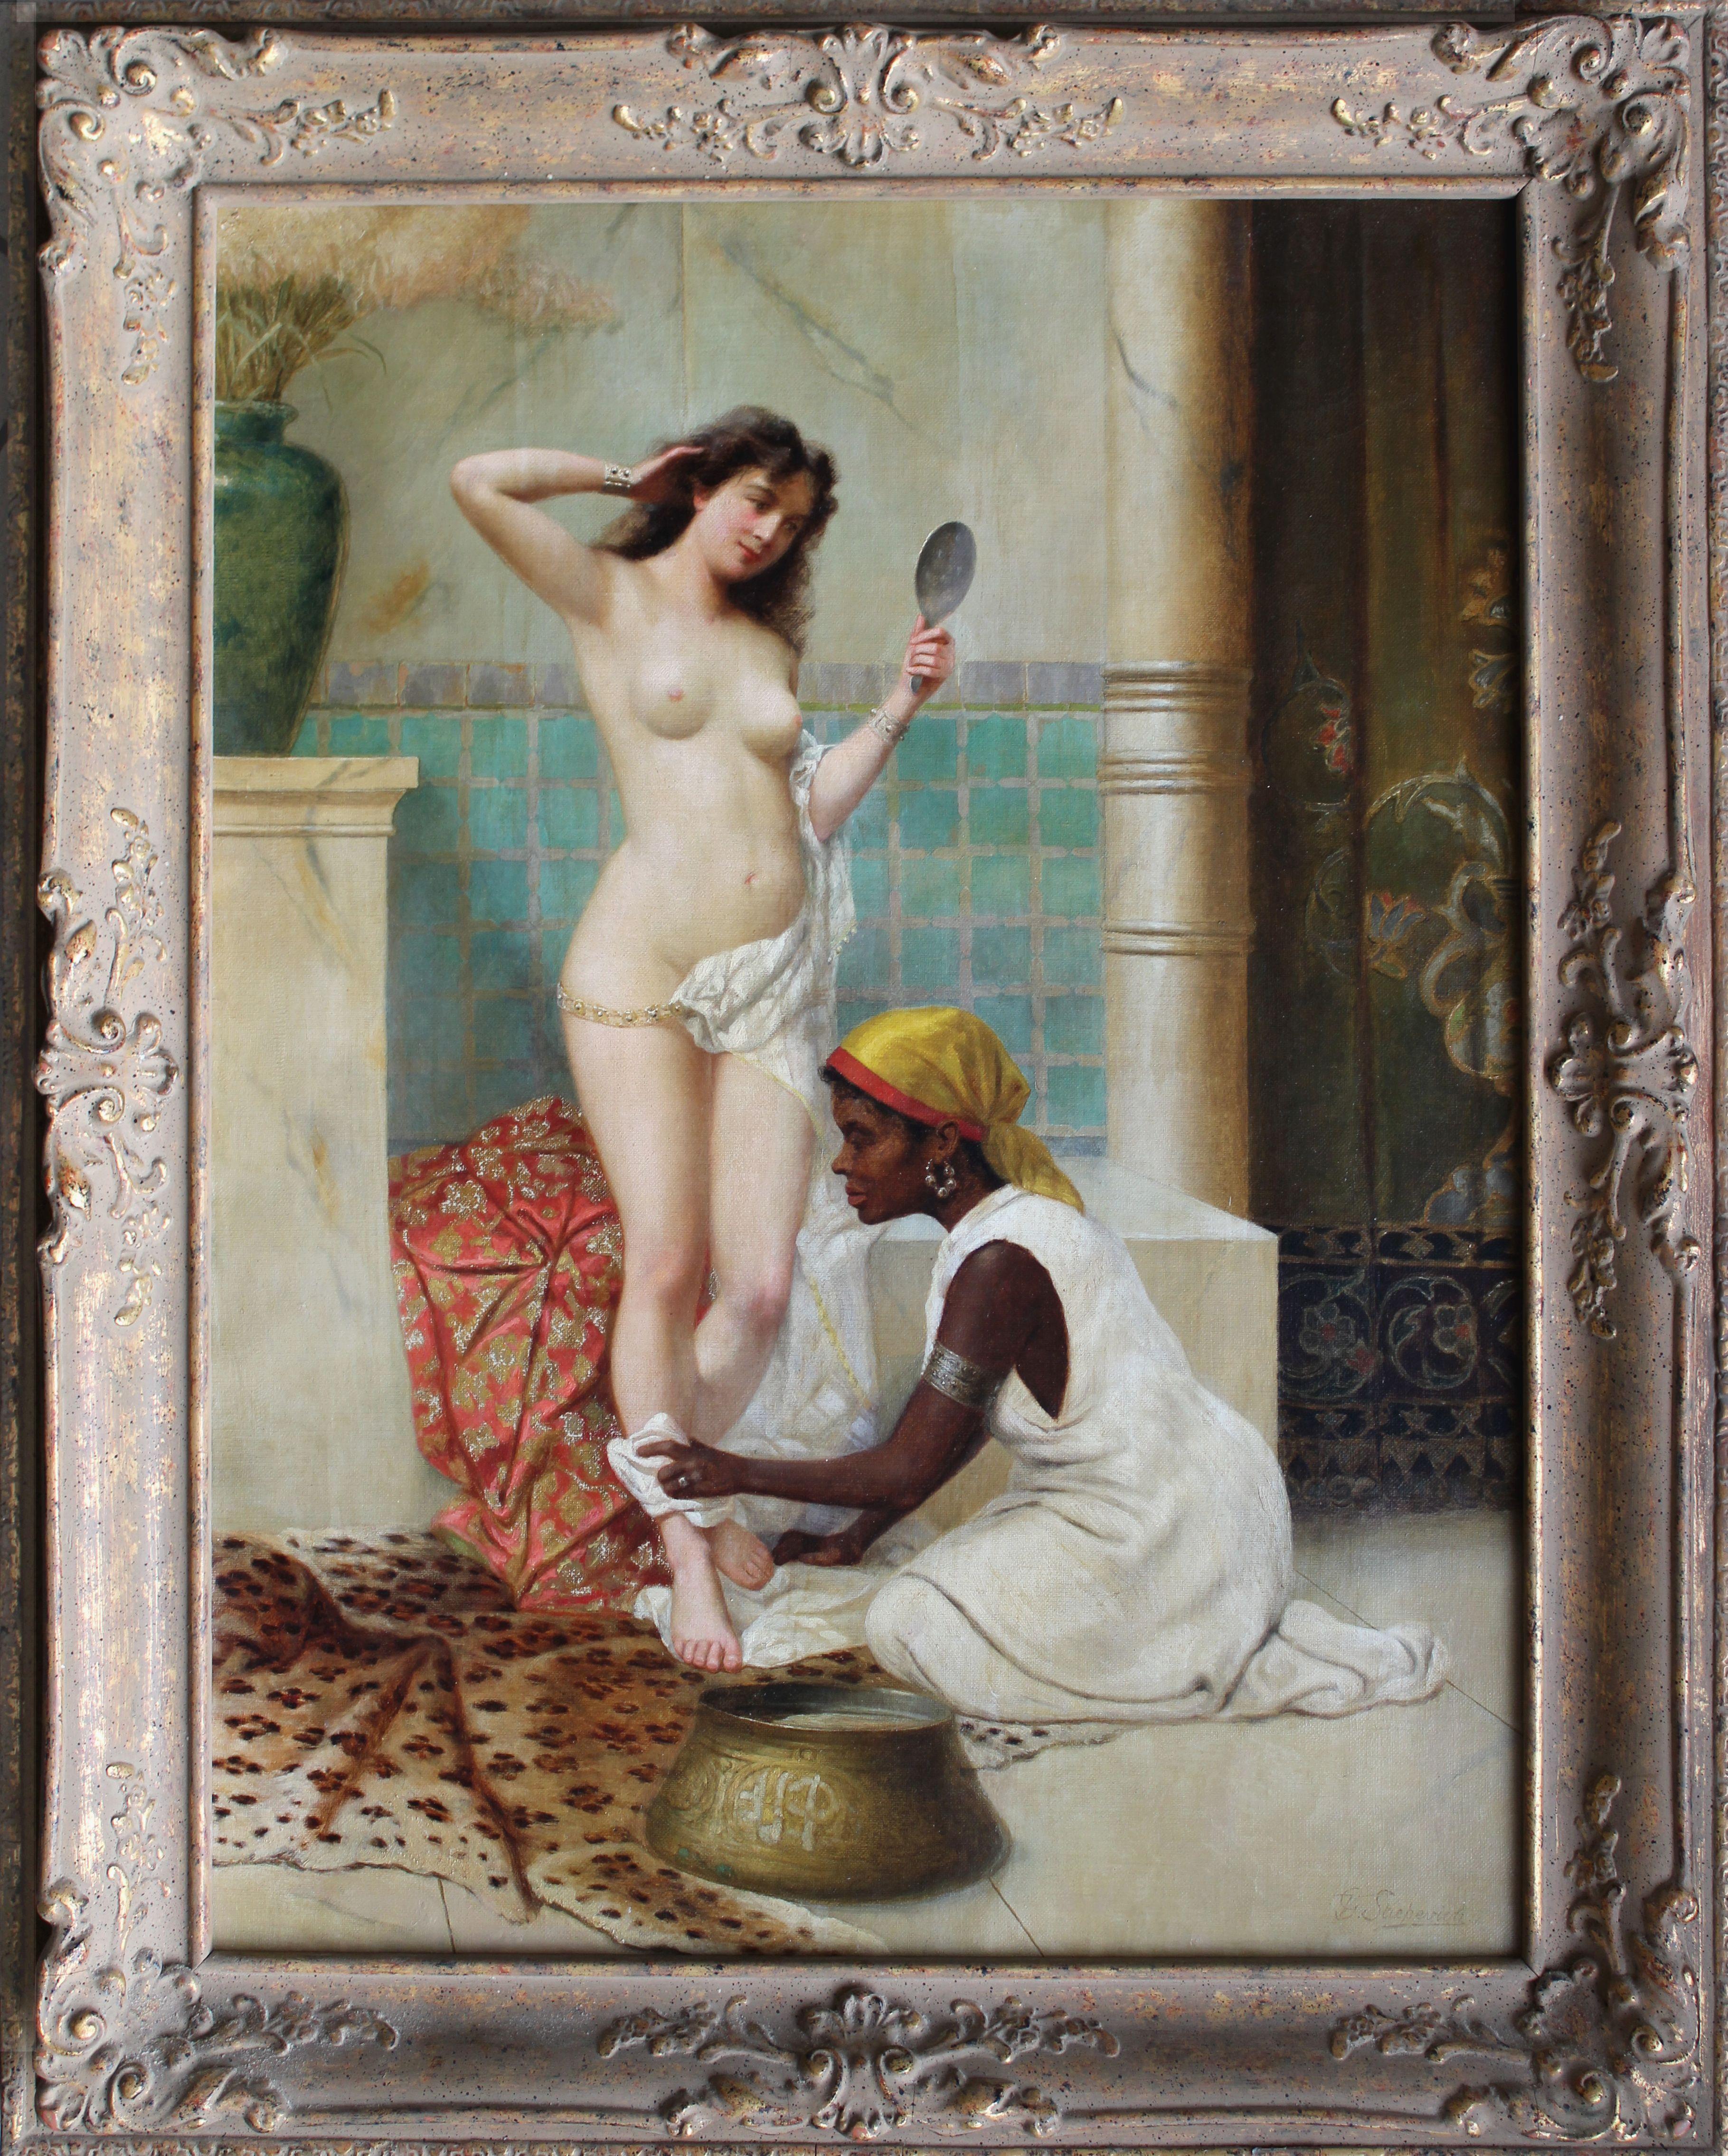 The Bath. Late 19th Century. Oil on canvas, 61x46 сm - Painting by Vinsent G. Stiepevich